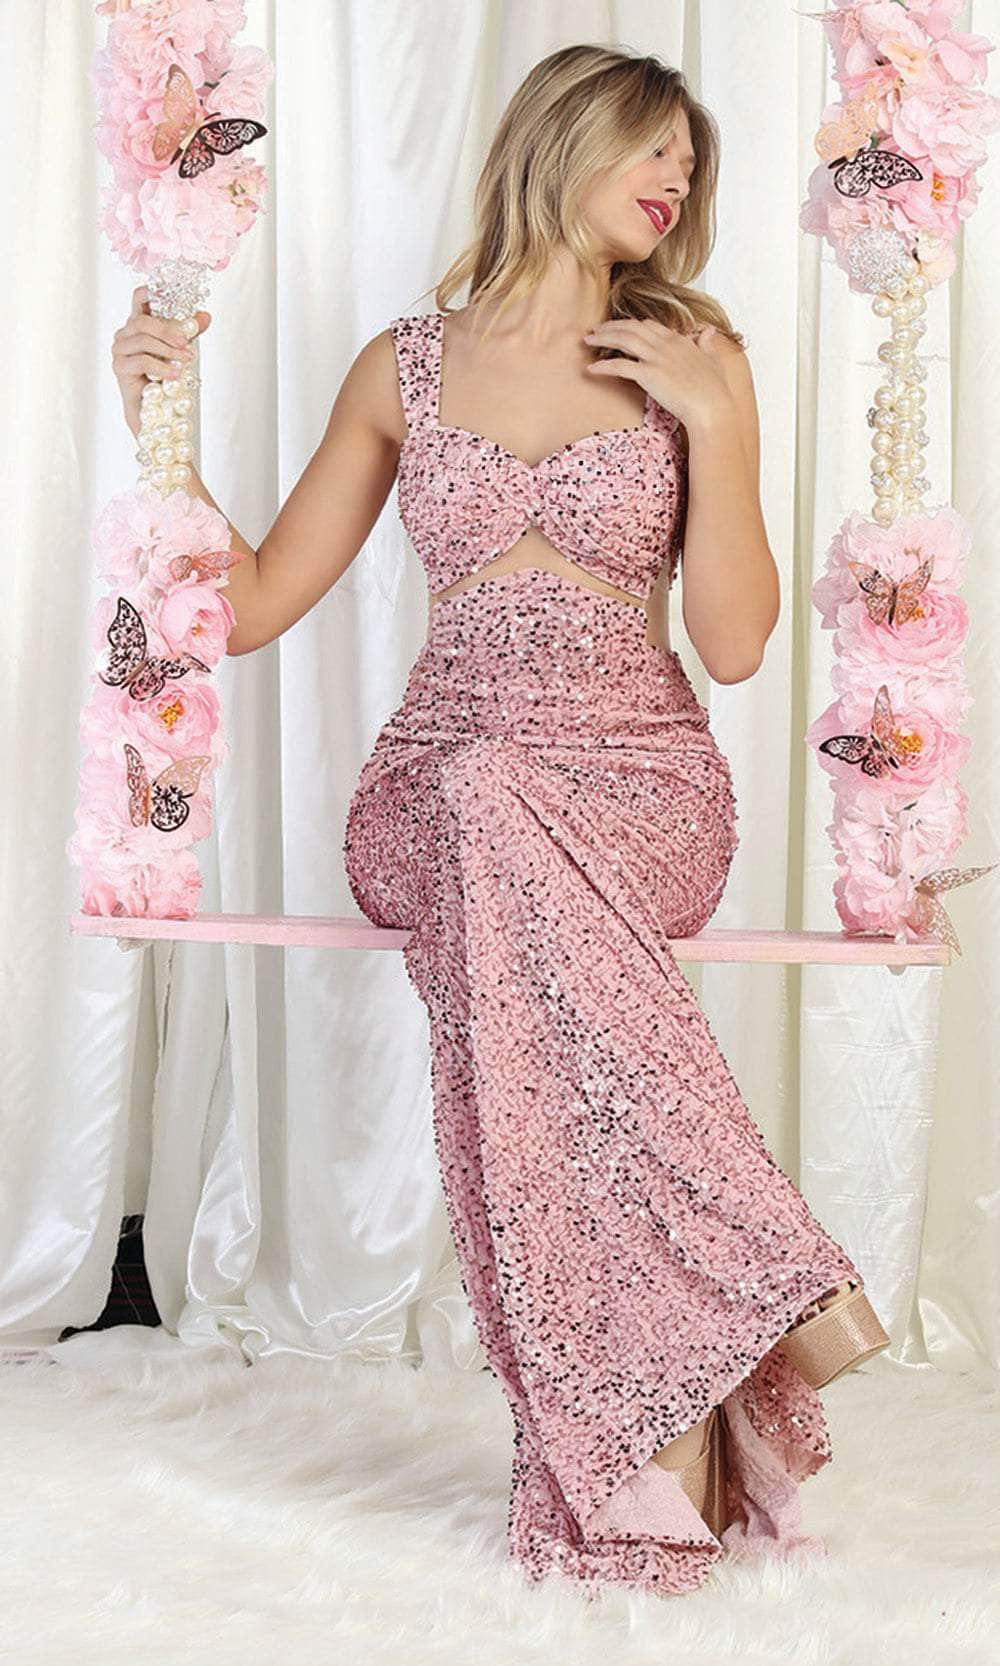 Image of May Queen RQ8004 - Sequin Illusion Midriff Prom Dress